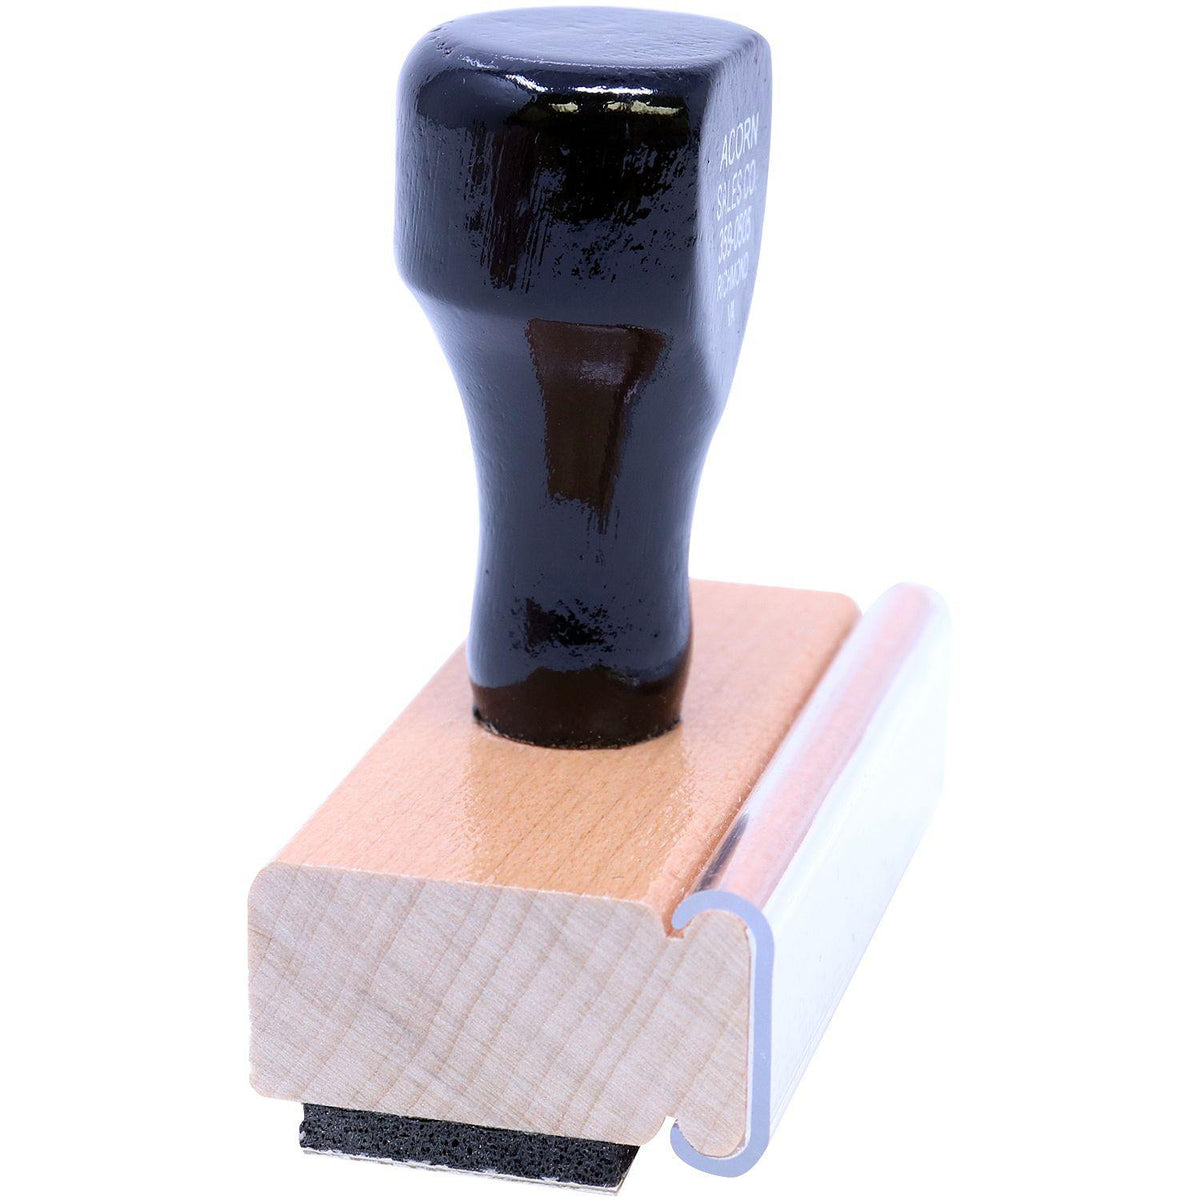 Side View of Large Cancelled Rubber Stamp at an Angle